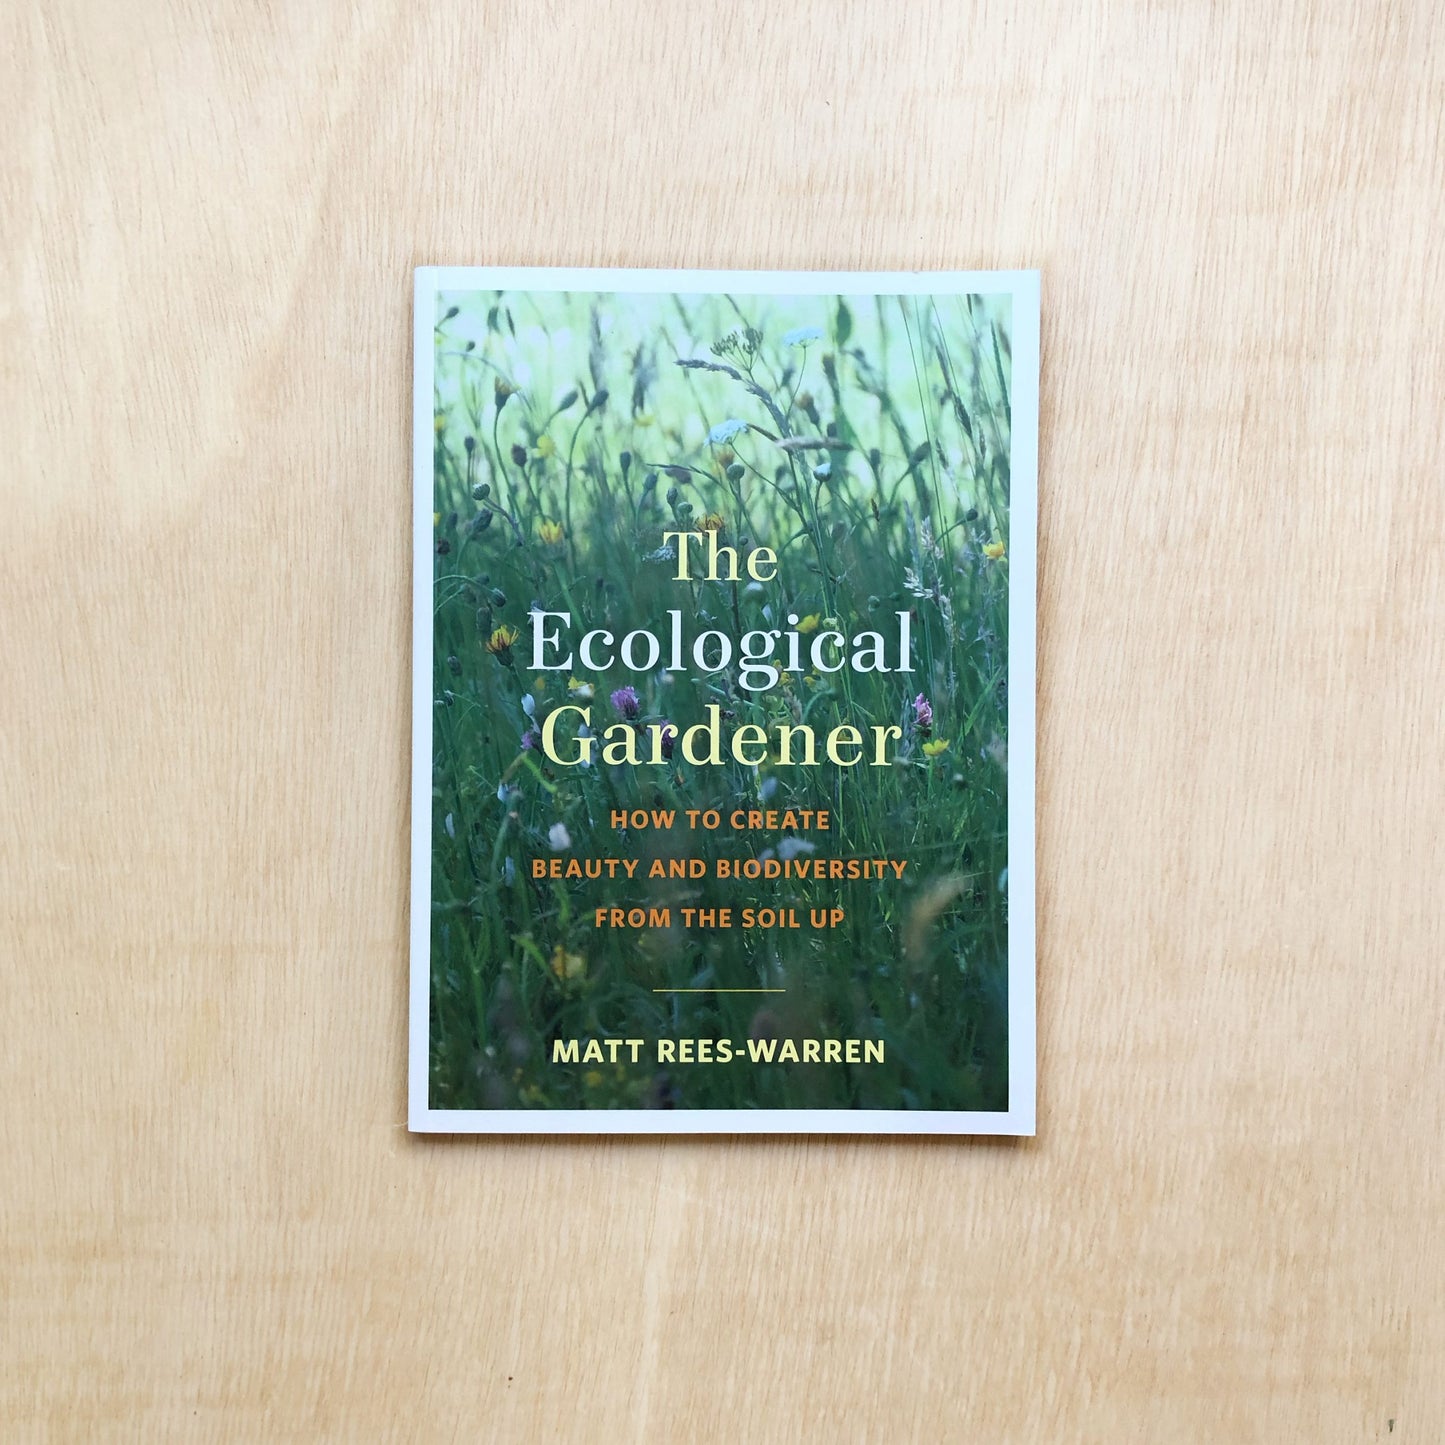 The Ecological Gardener - How to Create Beauty and Biodiversity